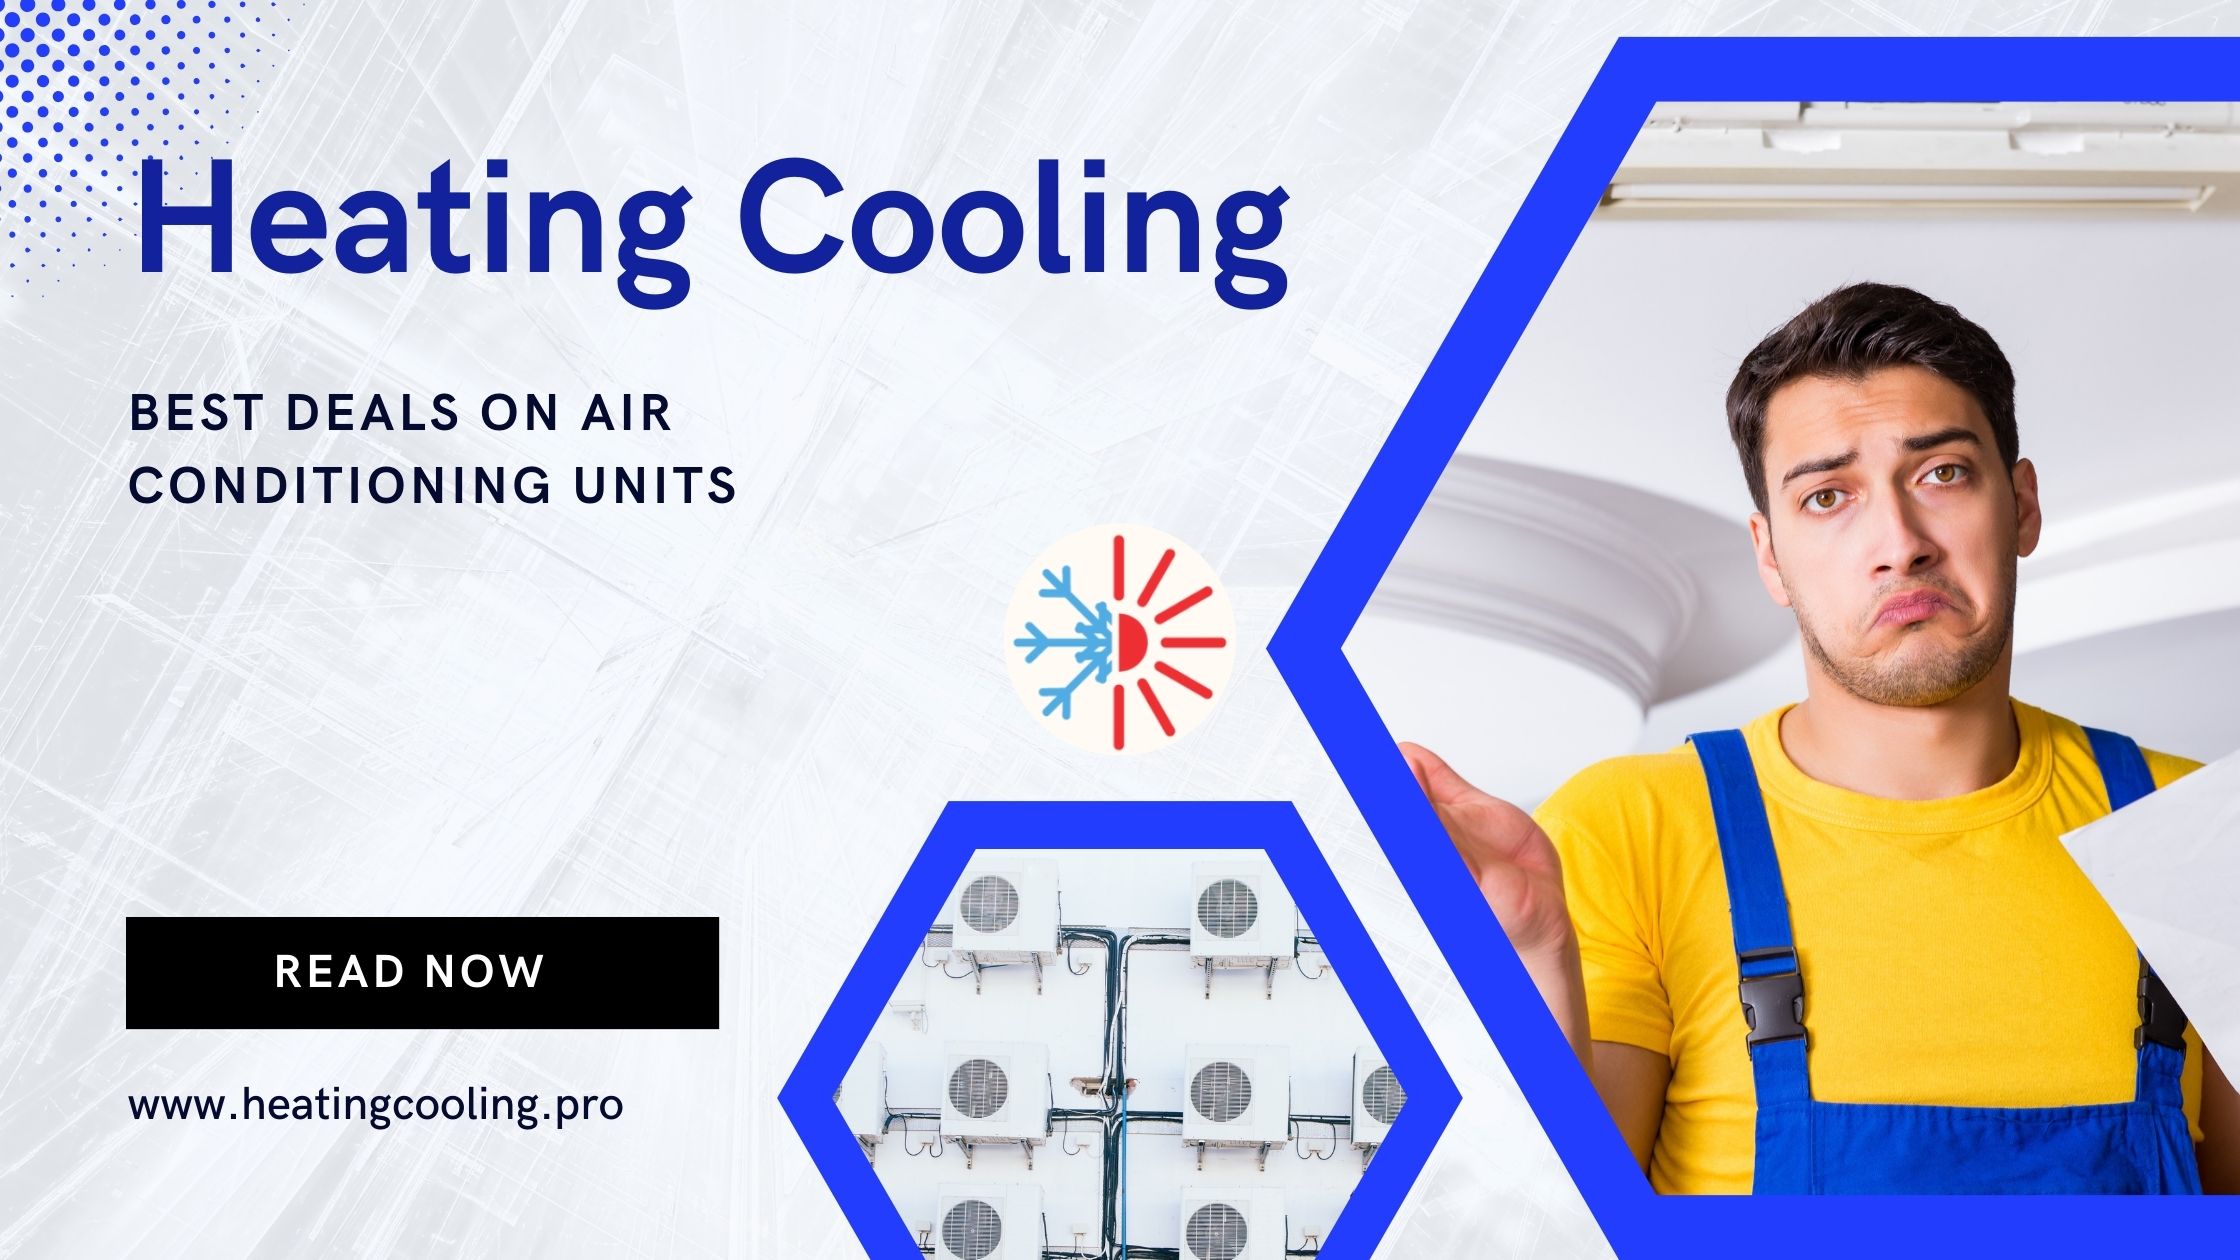 Best Deals on Air Conditioning Units